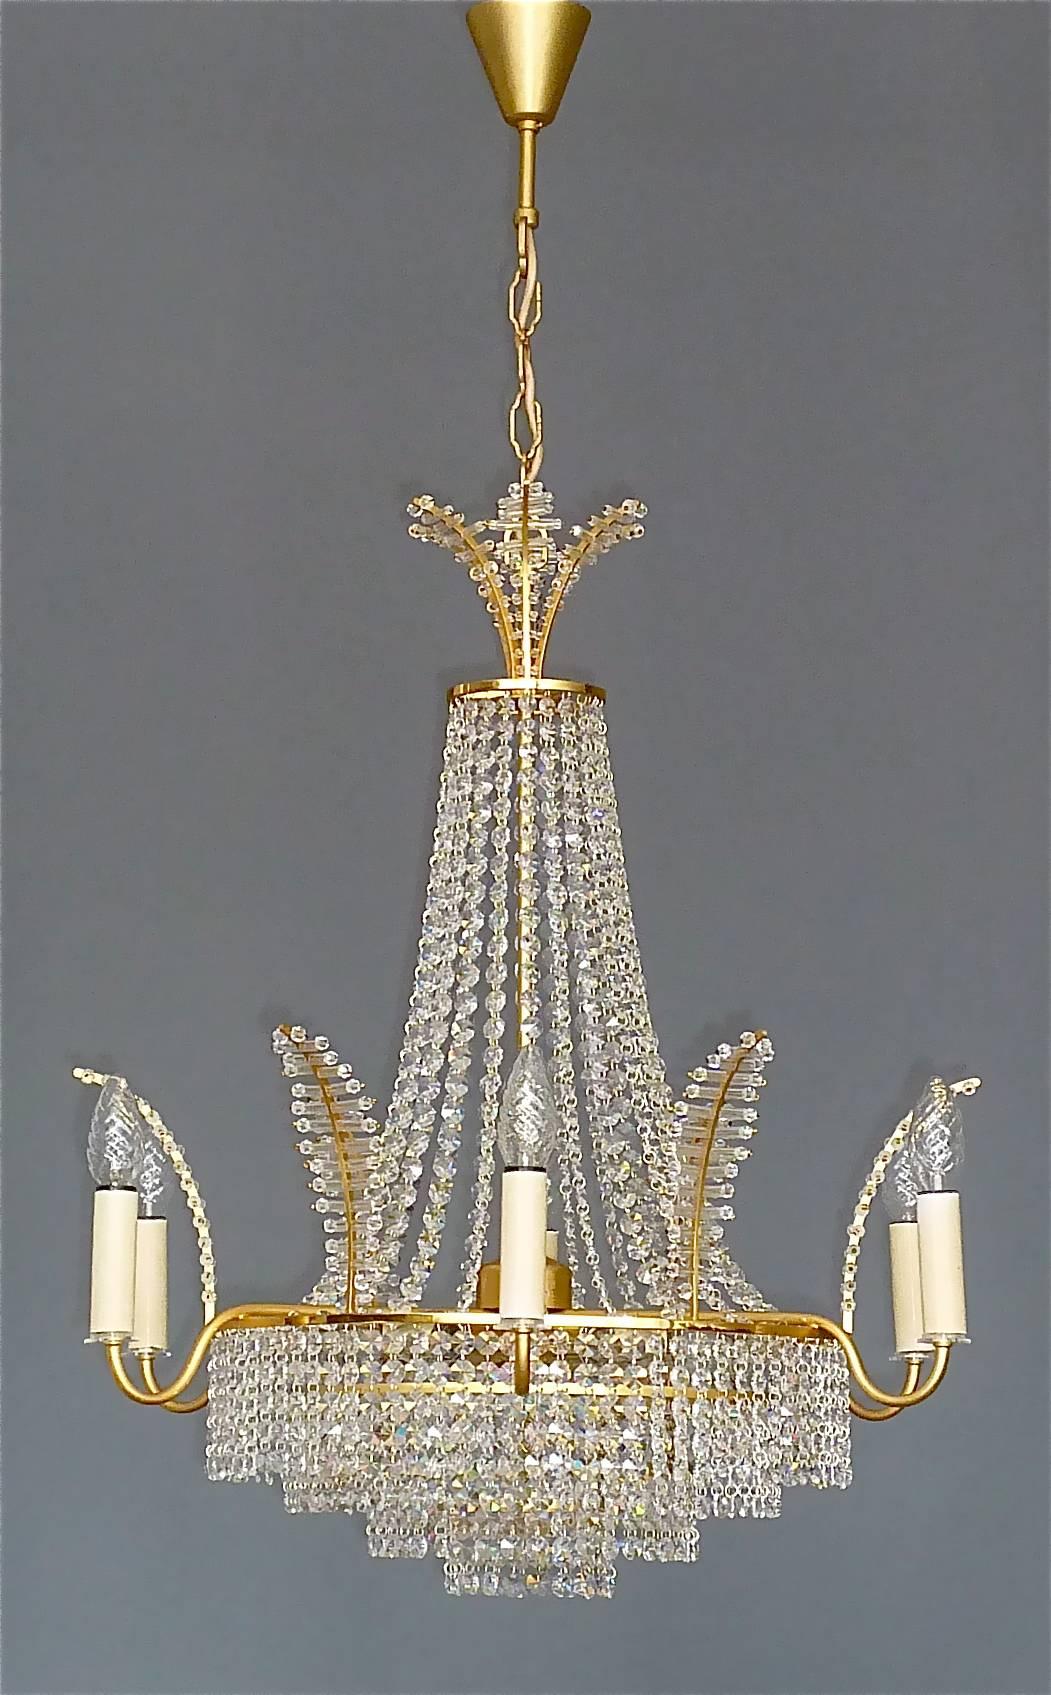 Fine large gilt brass and crystal glass chandelier made by high class lighting company Palwa, Germany, circa 1960. The classical chain-hanging length-adjustable chandelier has four cascading tiers, a palm-leaf crown motif on top and outer rim and